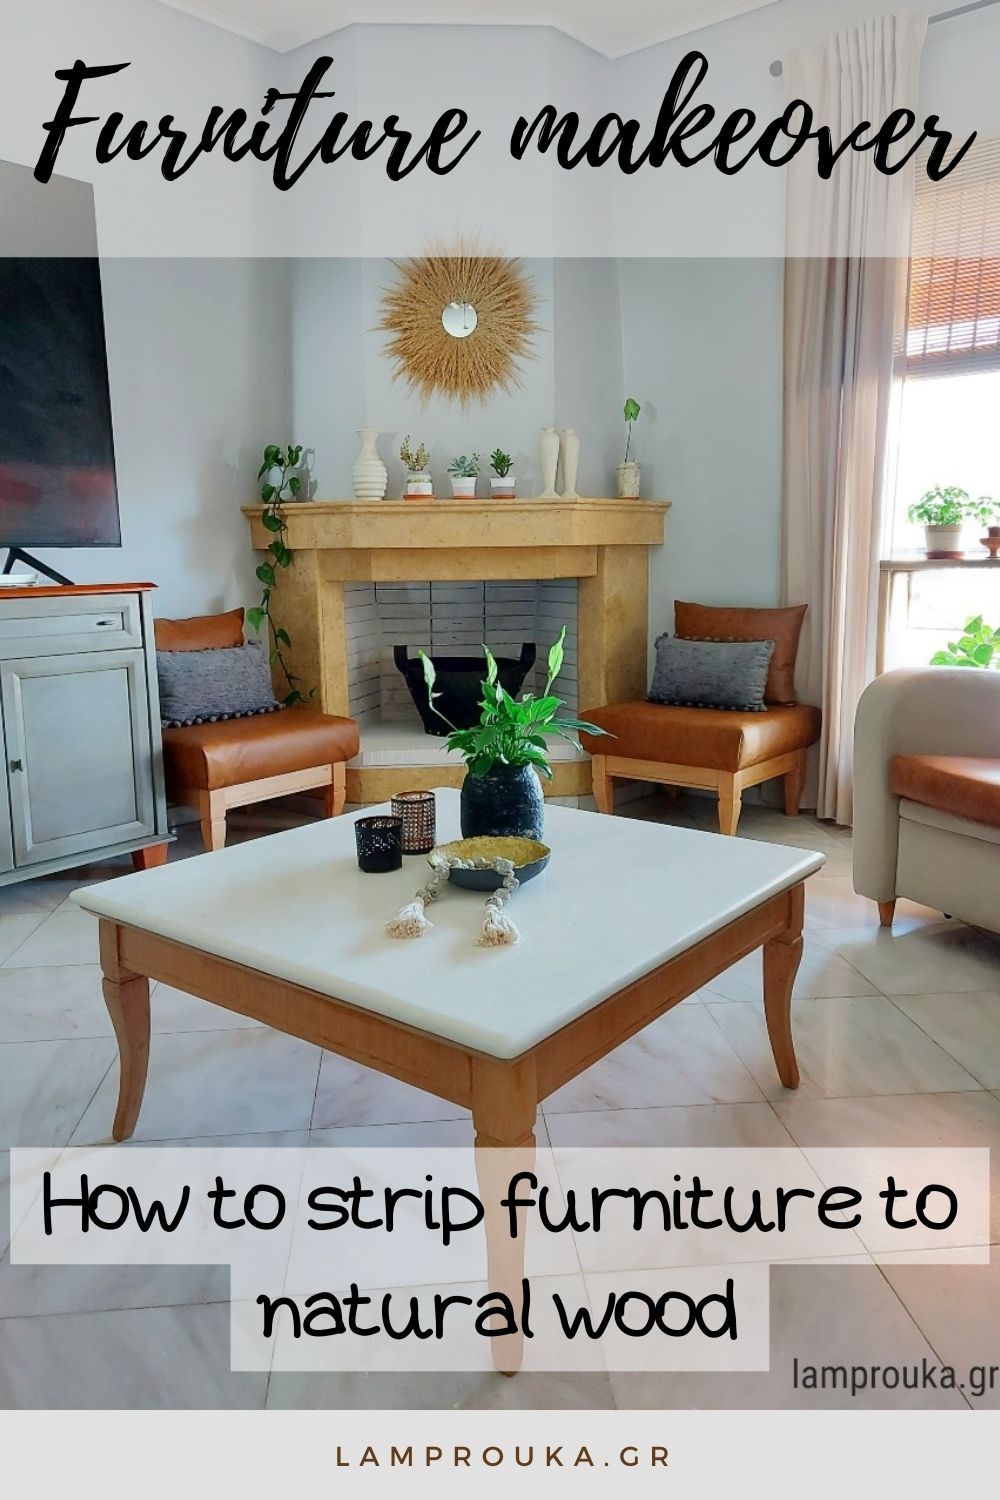 Furniture makeover how to strip furniture to natural wood